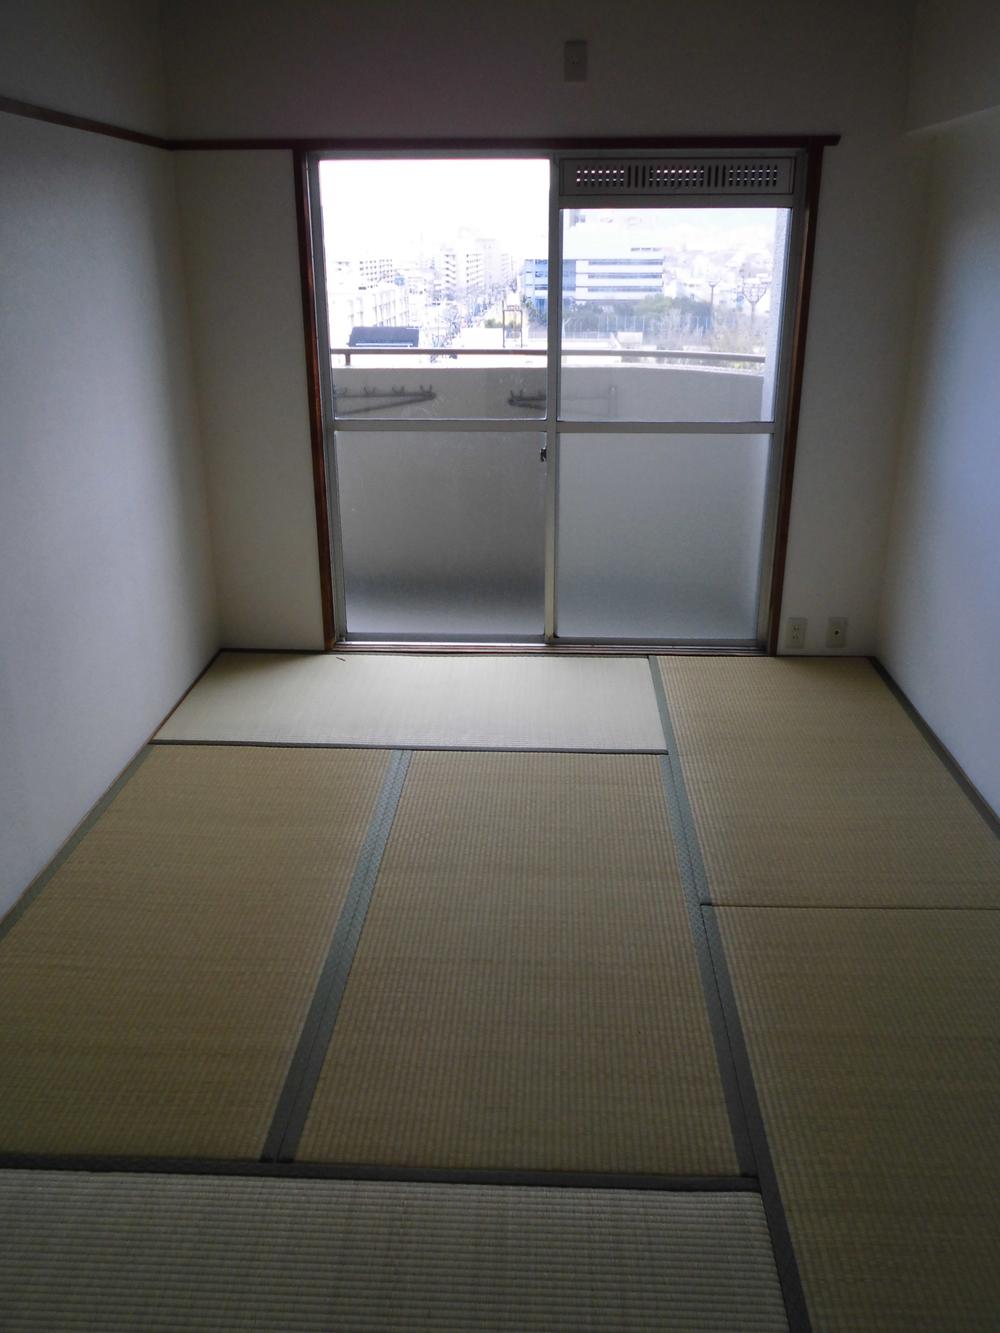 Non-living room. Together with Japanese-style room 2 between lasts 12 Pledge.